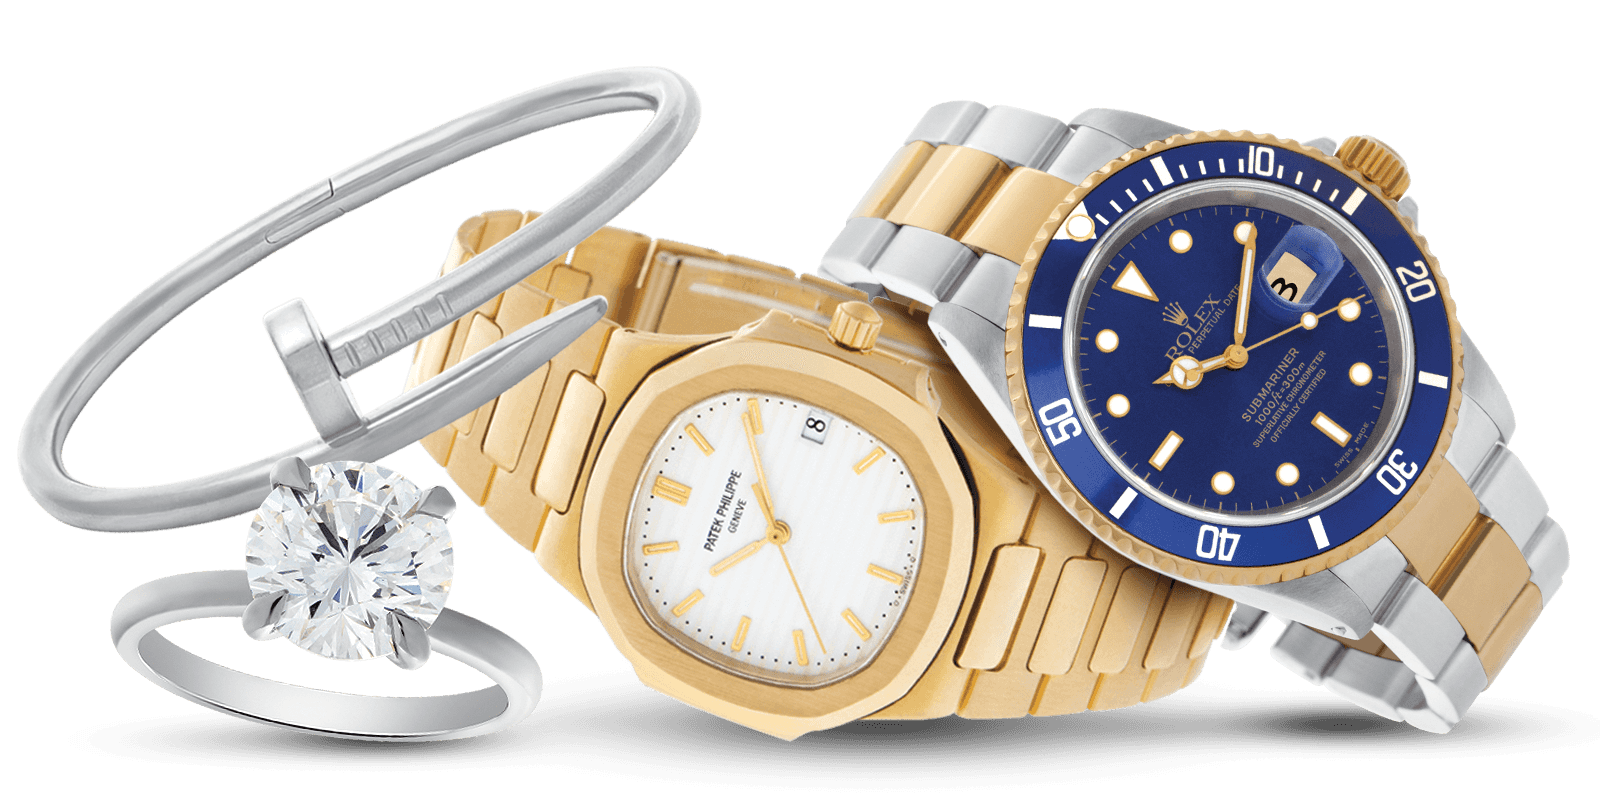 Bob's Watches Makes Buying and Selling Rolexes More Transparent, Fair